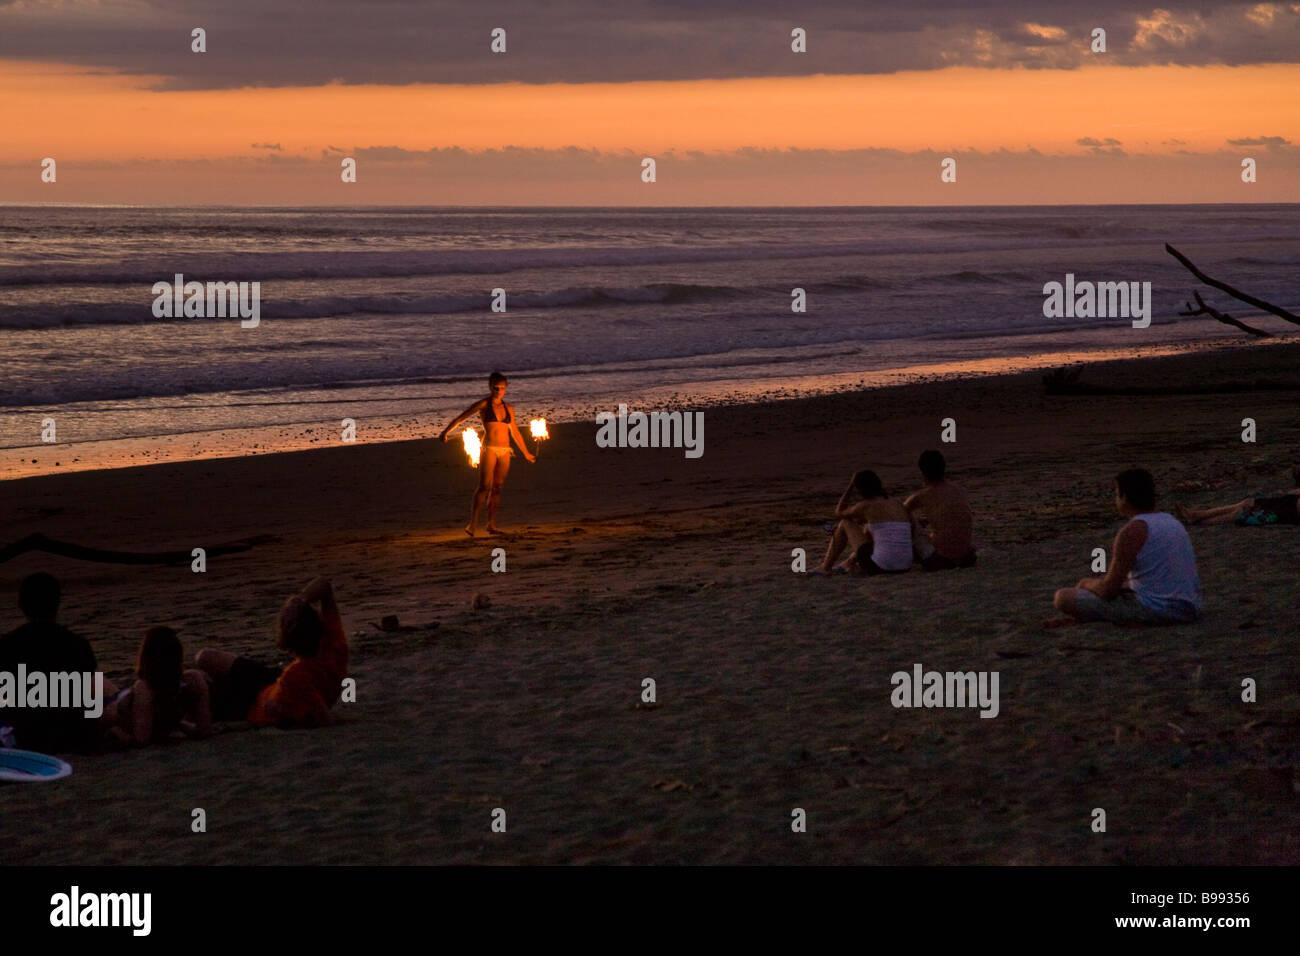 A fire dancer juggling torches at sunset in Dominical, Costa Rica. Stock Photo